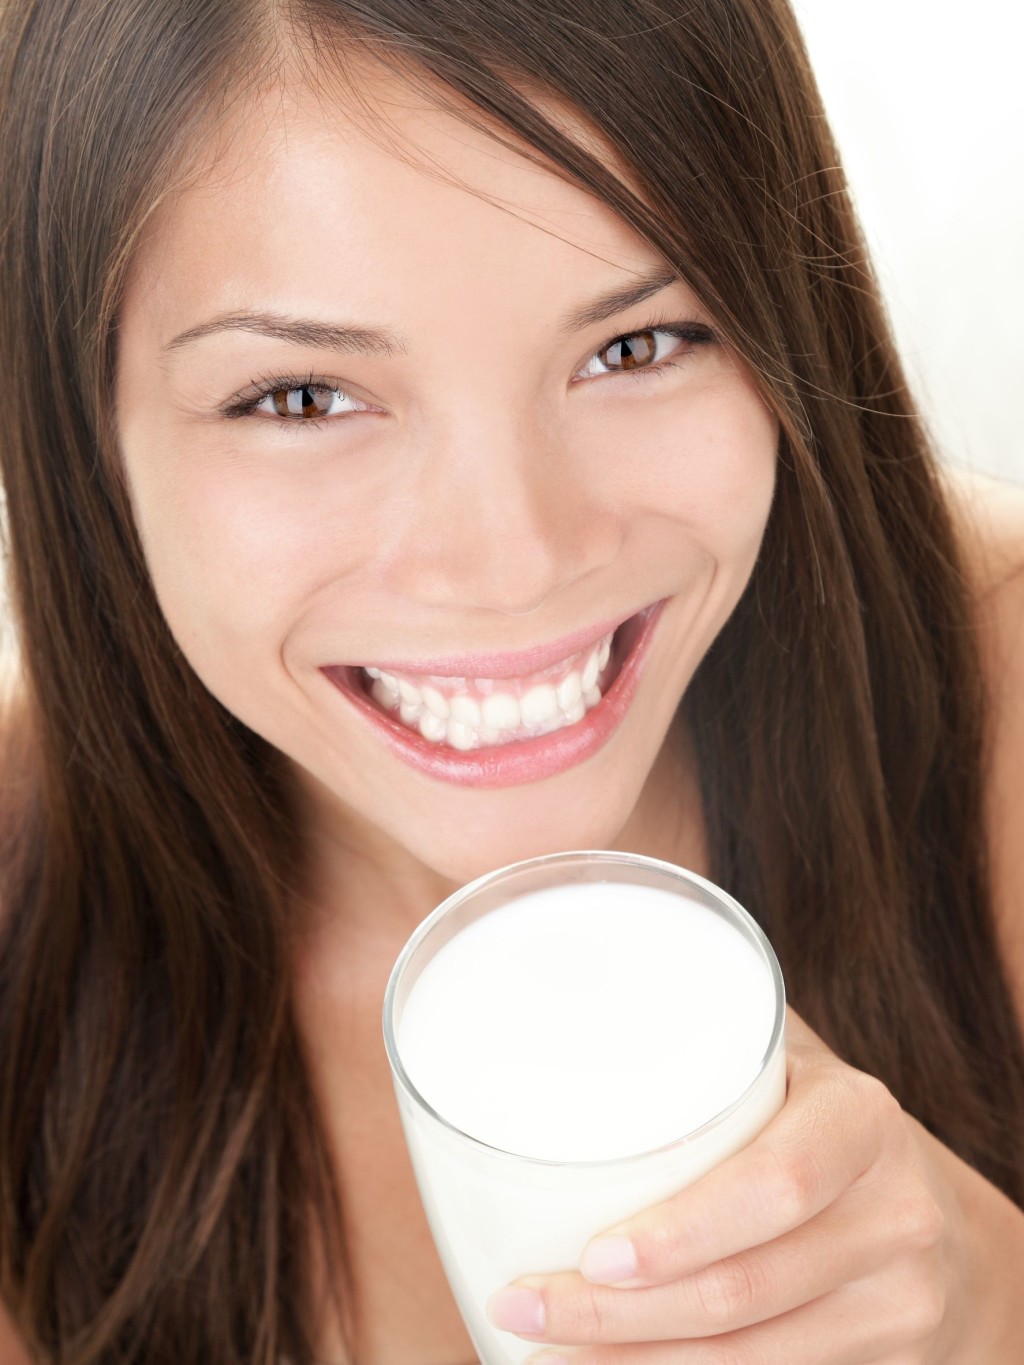 7780041 - milk - woman drinking milk. happy smiling beautiful young woman enjoying a glass milk while smiling looking at camera